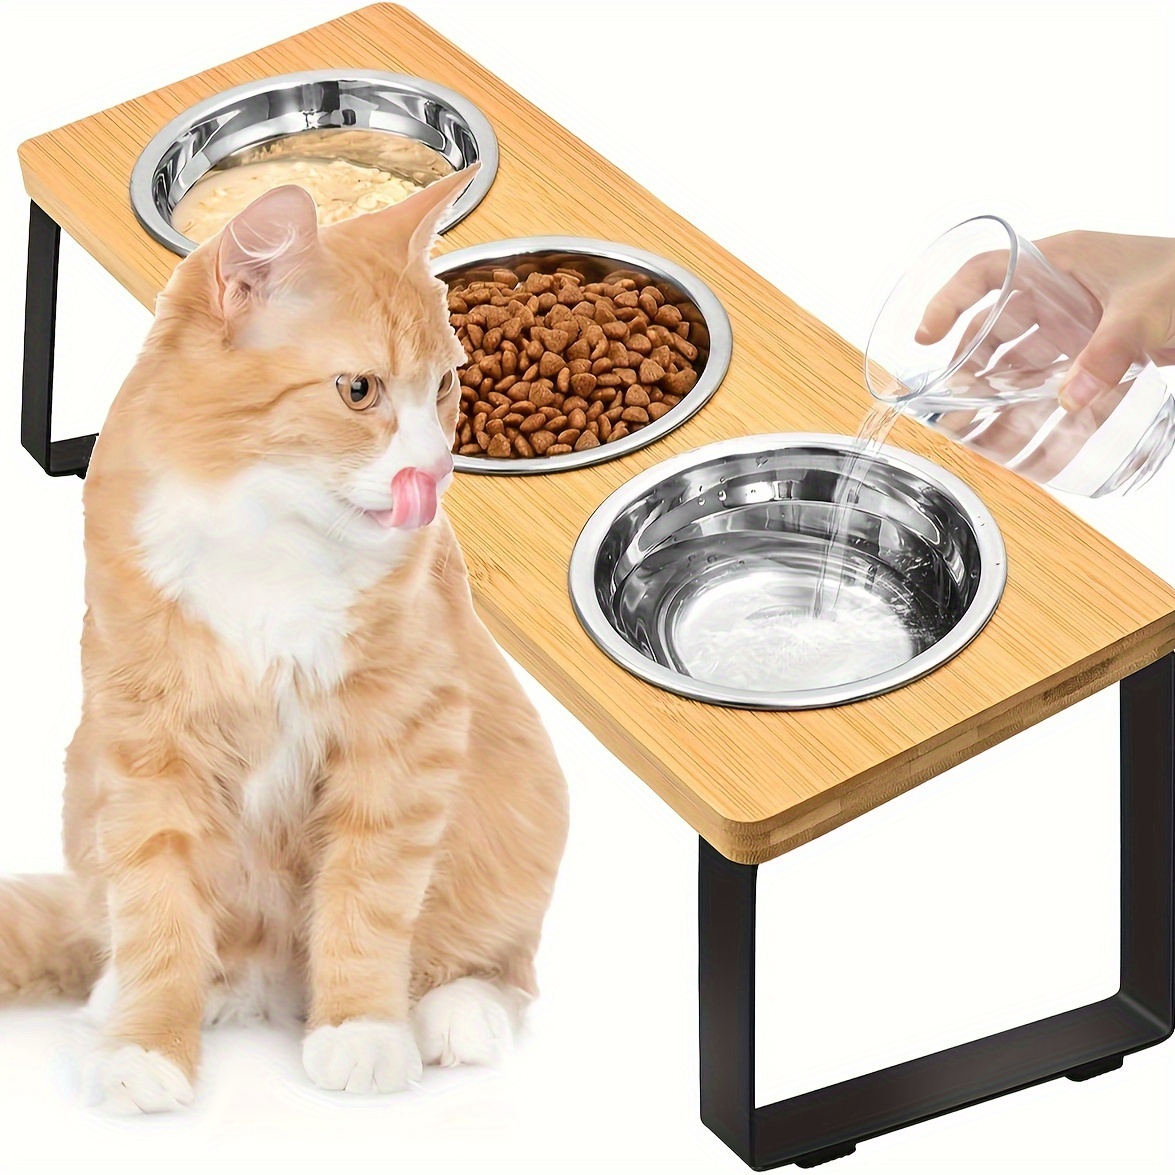 

3 In 1 Elevated Car Bowls, Solid Wood Cat Feeder Station With Stainless Steel Food Bowl Water Bowl For Neck Protection, Pet Feeding Supplies